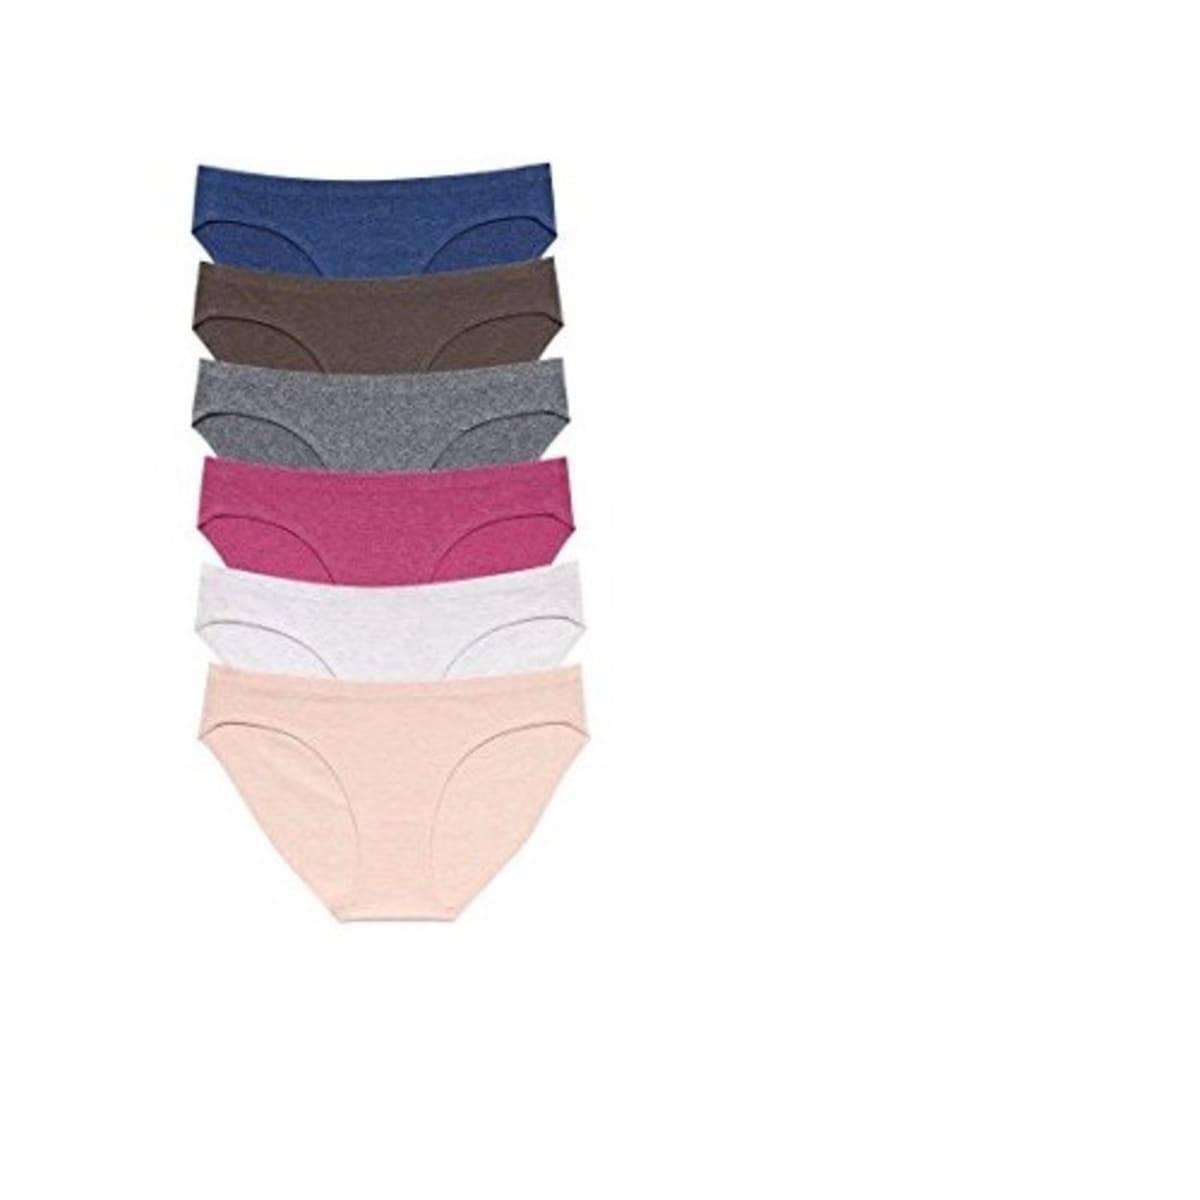 Seamless Pants For Women - Set Of 6